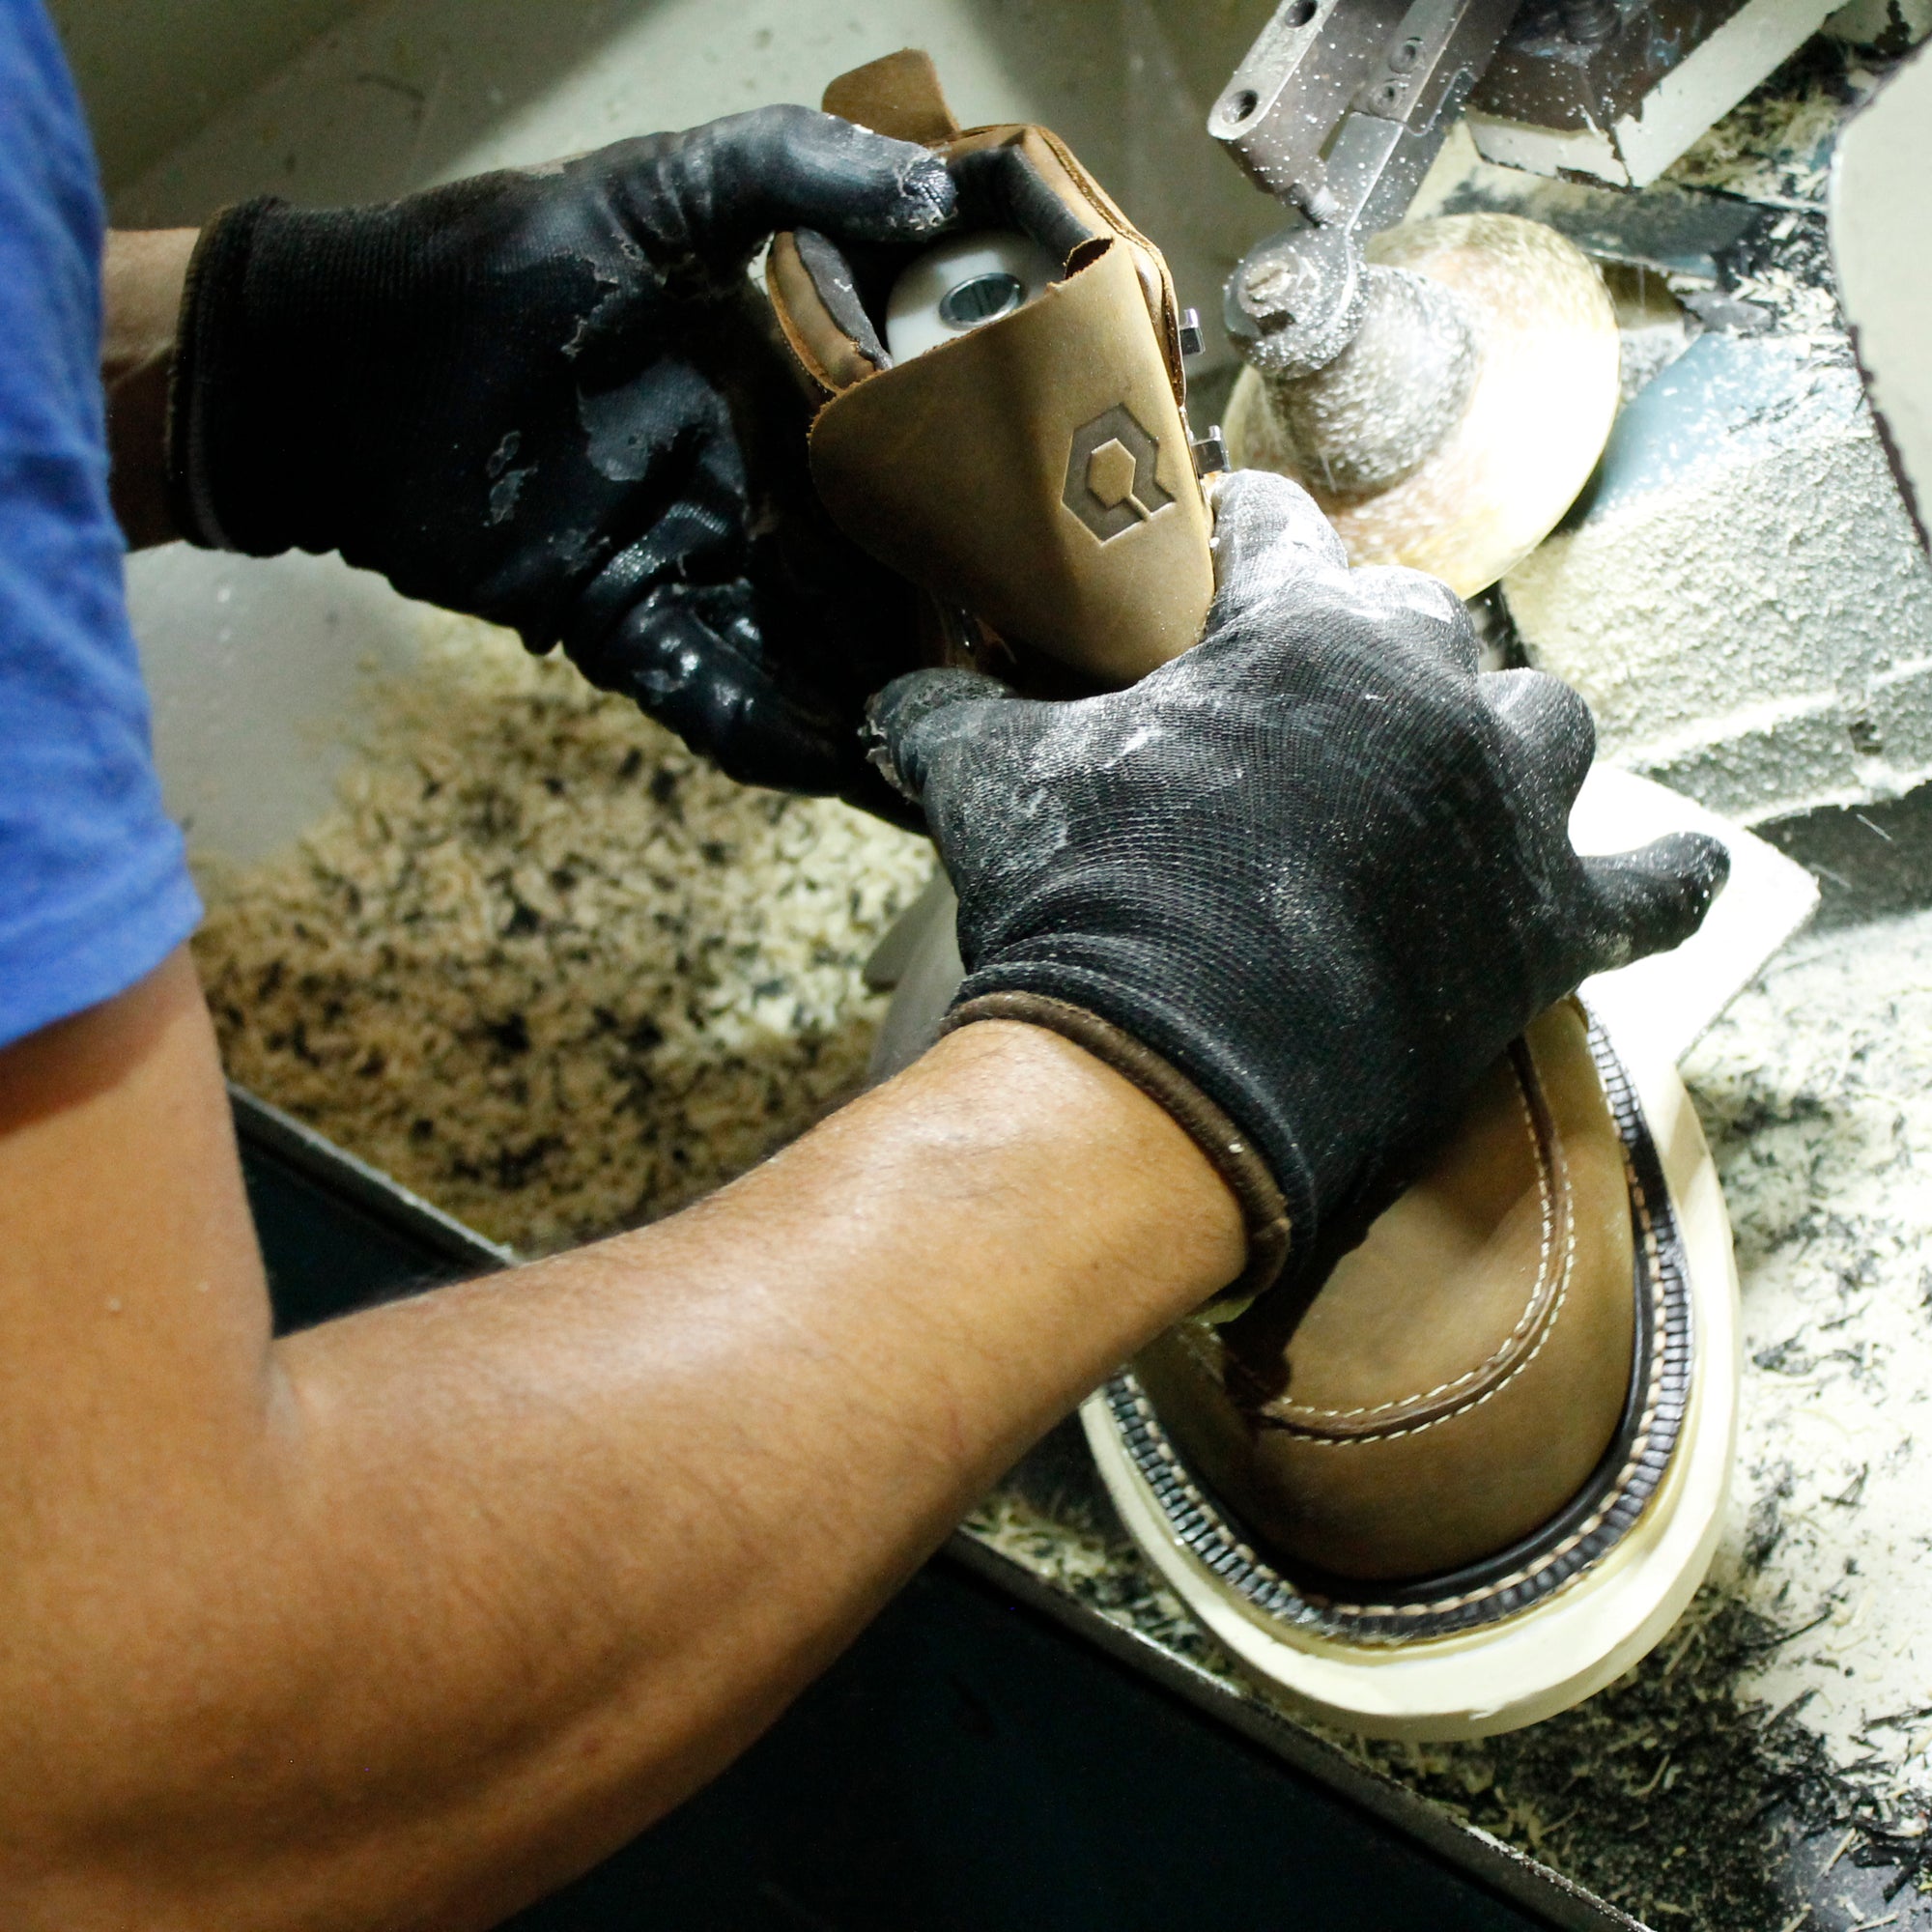 QLTY work boots in production